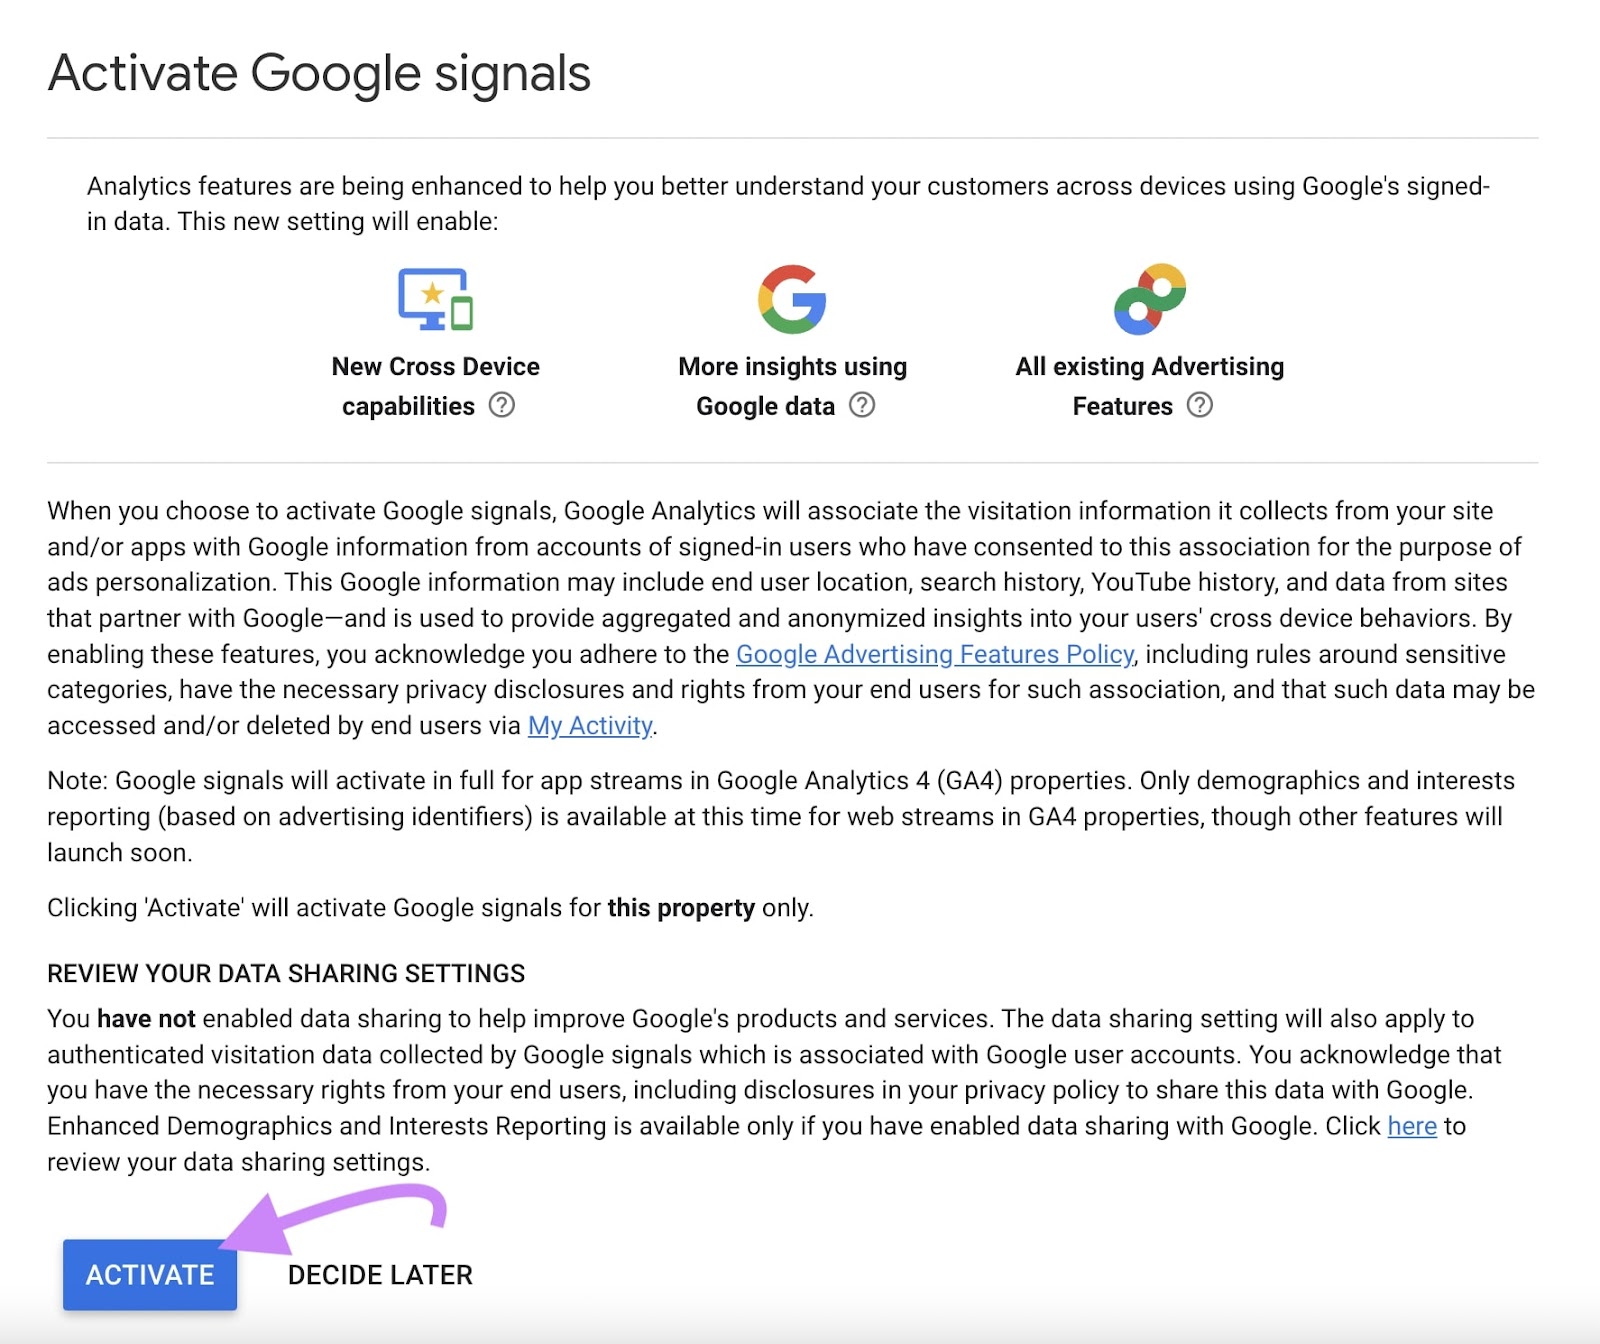 Activating Google signals data collection